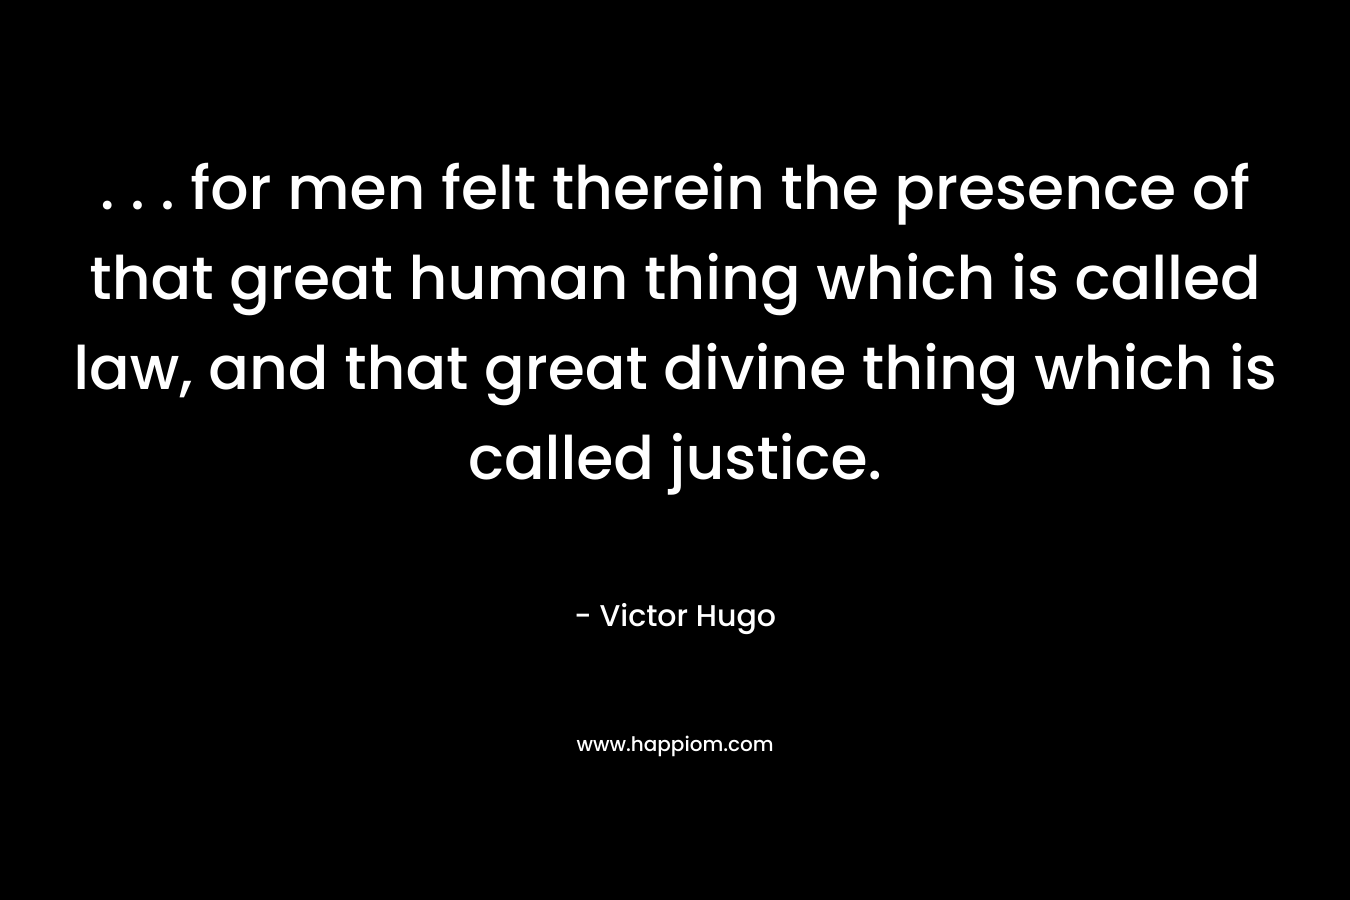 . . . for men felt therein the presence of that great human thing which is called law, and that great divine thing which is called justice. – Victor Hugo